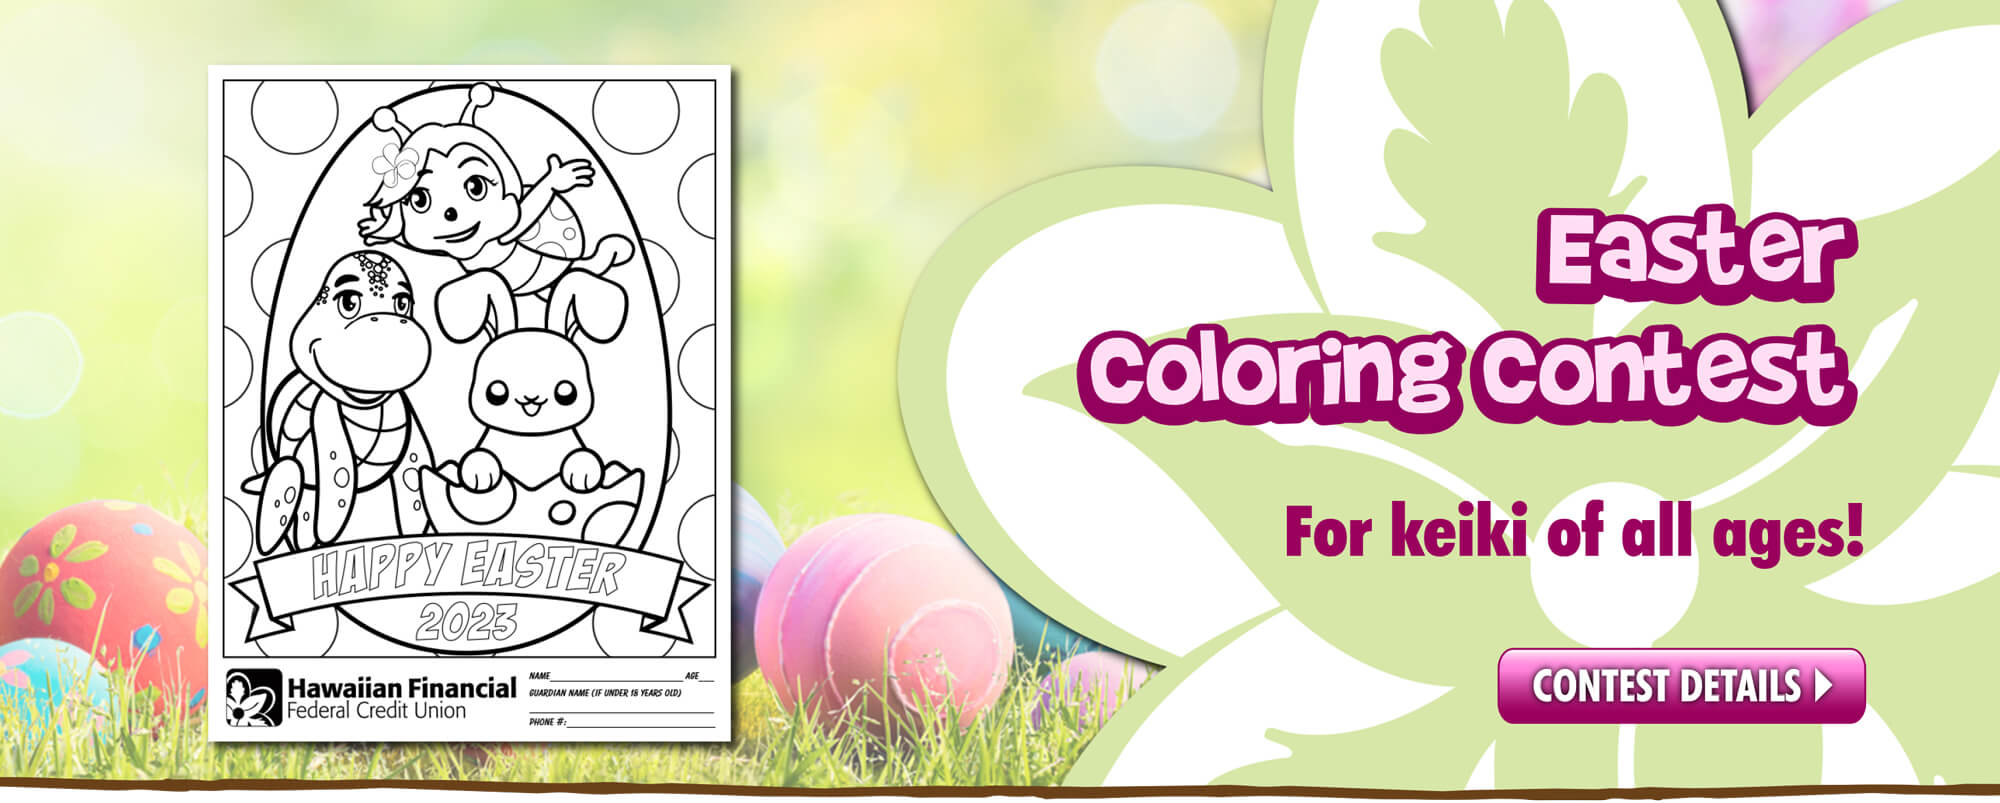 2023 Easter Coloring Contest - for keiki of all ages!